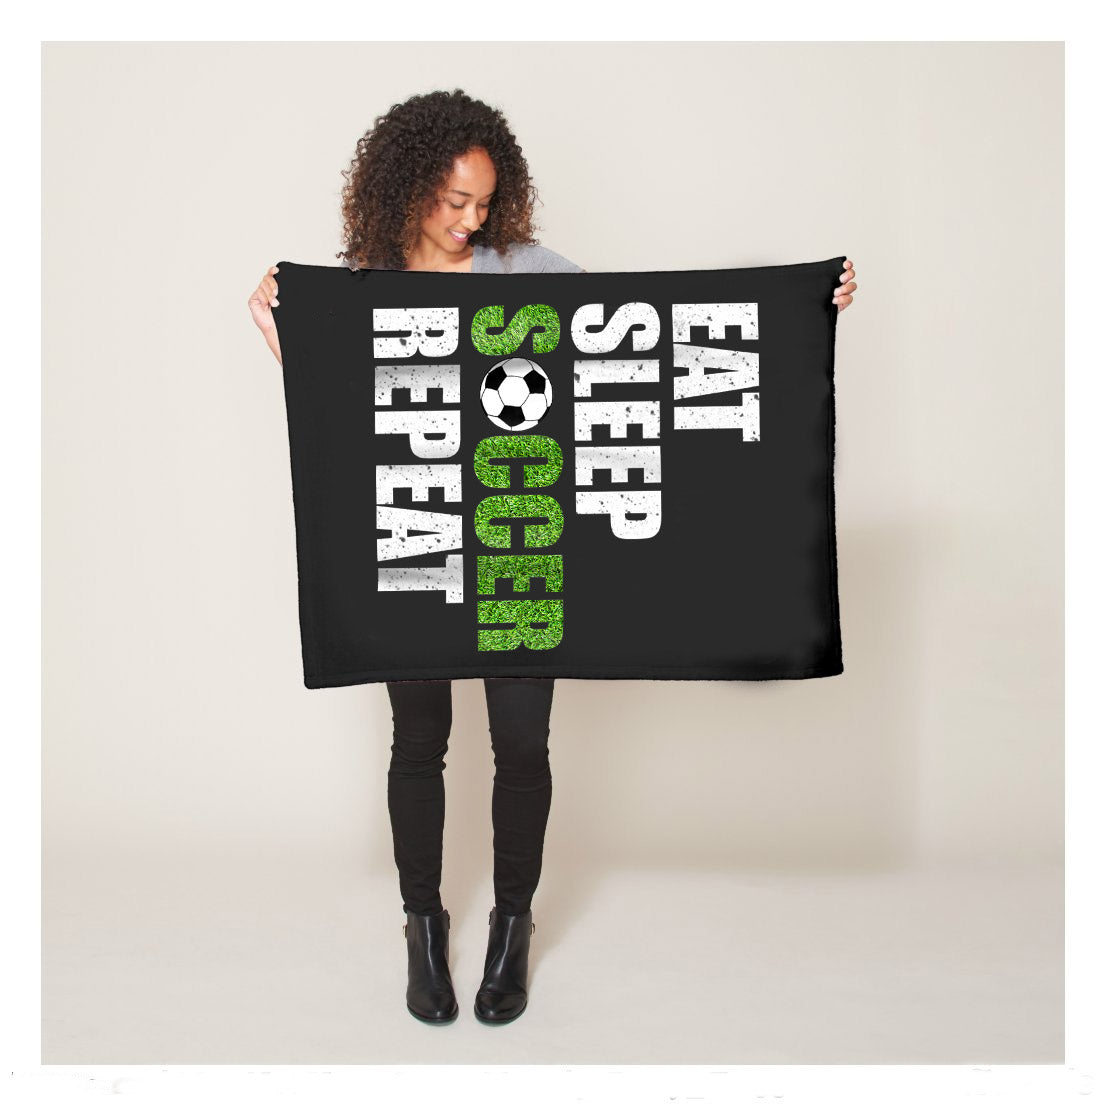 Funny Soccer Eat Sleep Soccer Repeat Fleece Blanket,  Soccer Outdoor Blankets, Soccer Gifts For Coach And Soccer Players, Birthday Gift For Soccer Player